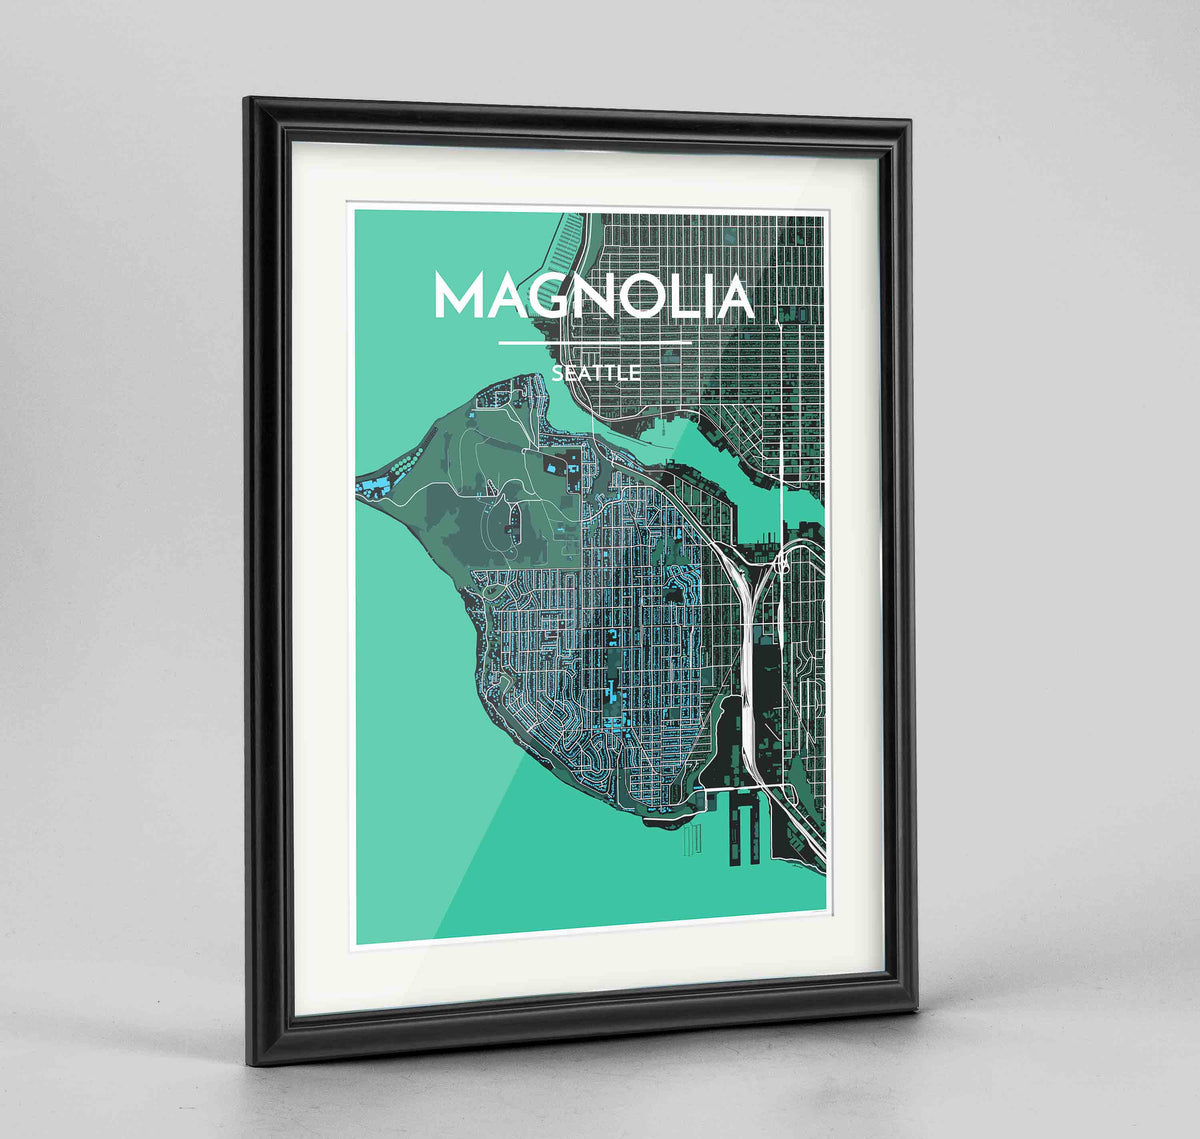 Framed Seattle Magnolia Neighbourhood Map Art Print 24x36&quot; Traditional Black frame Point Two Design Group